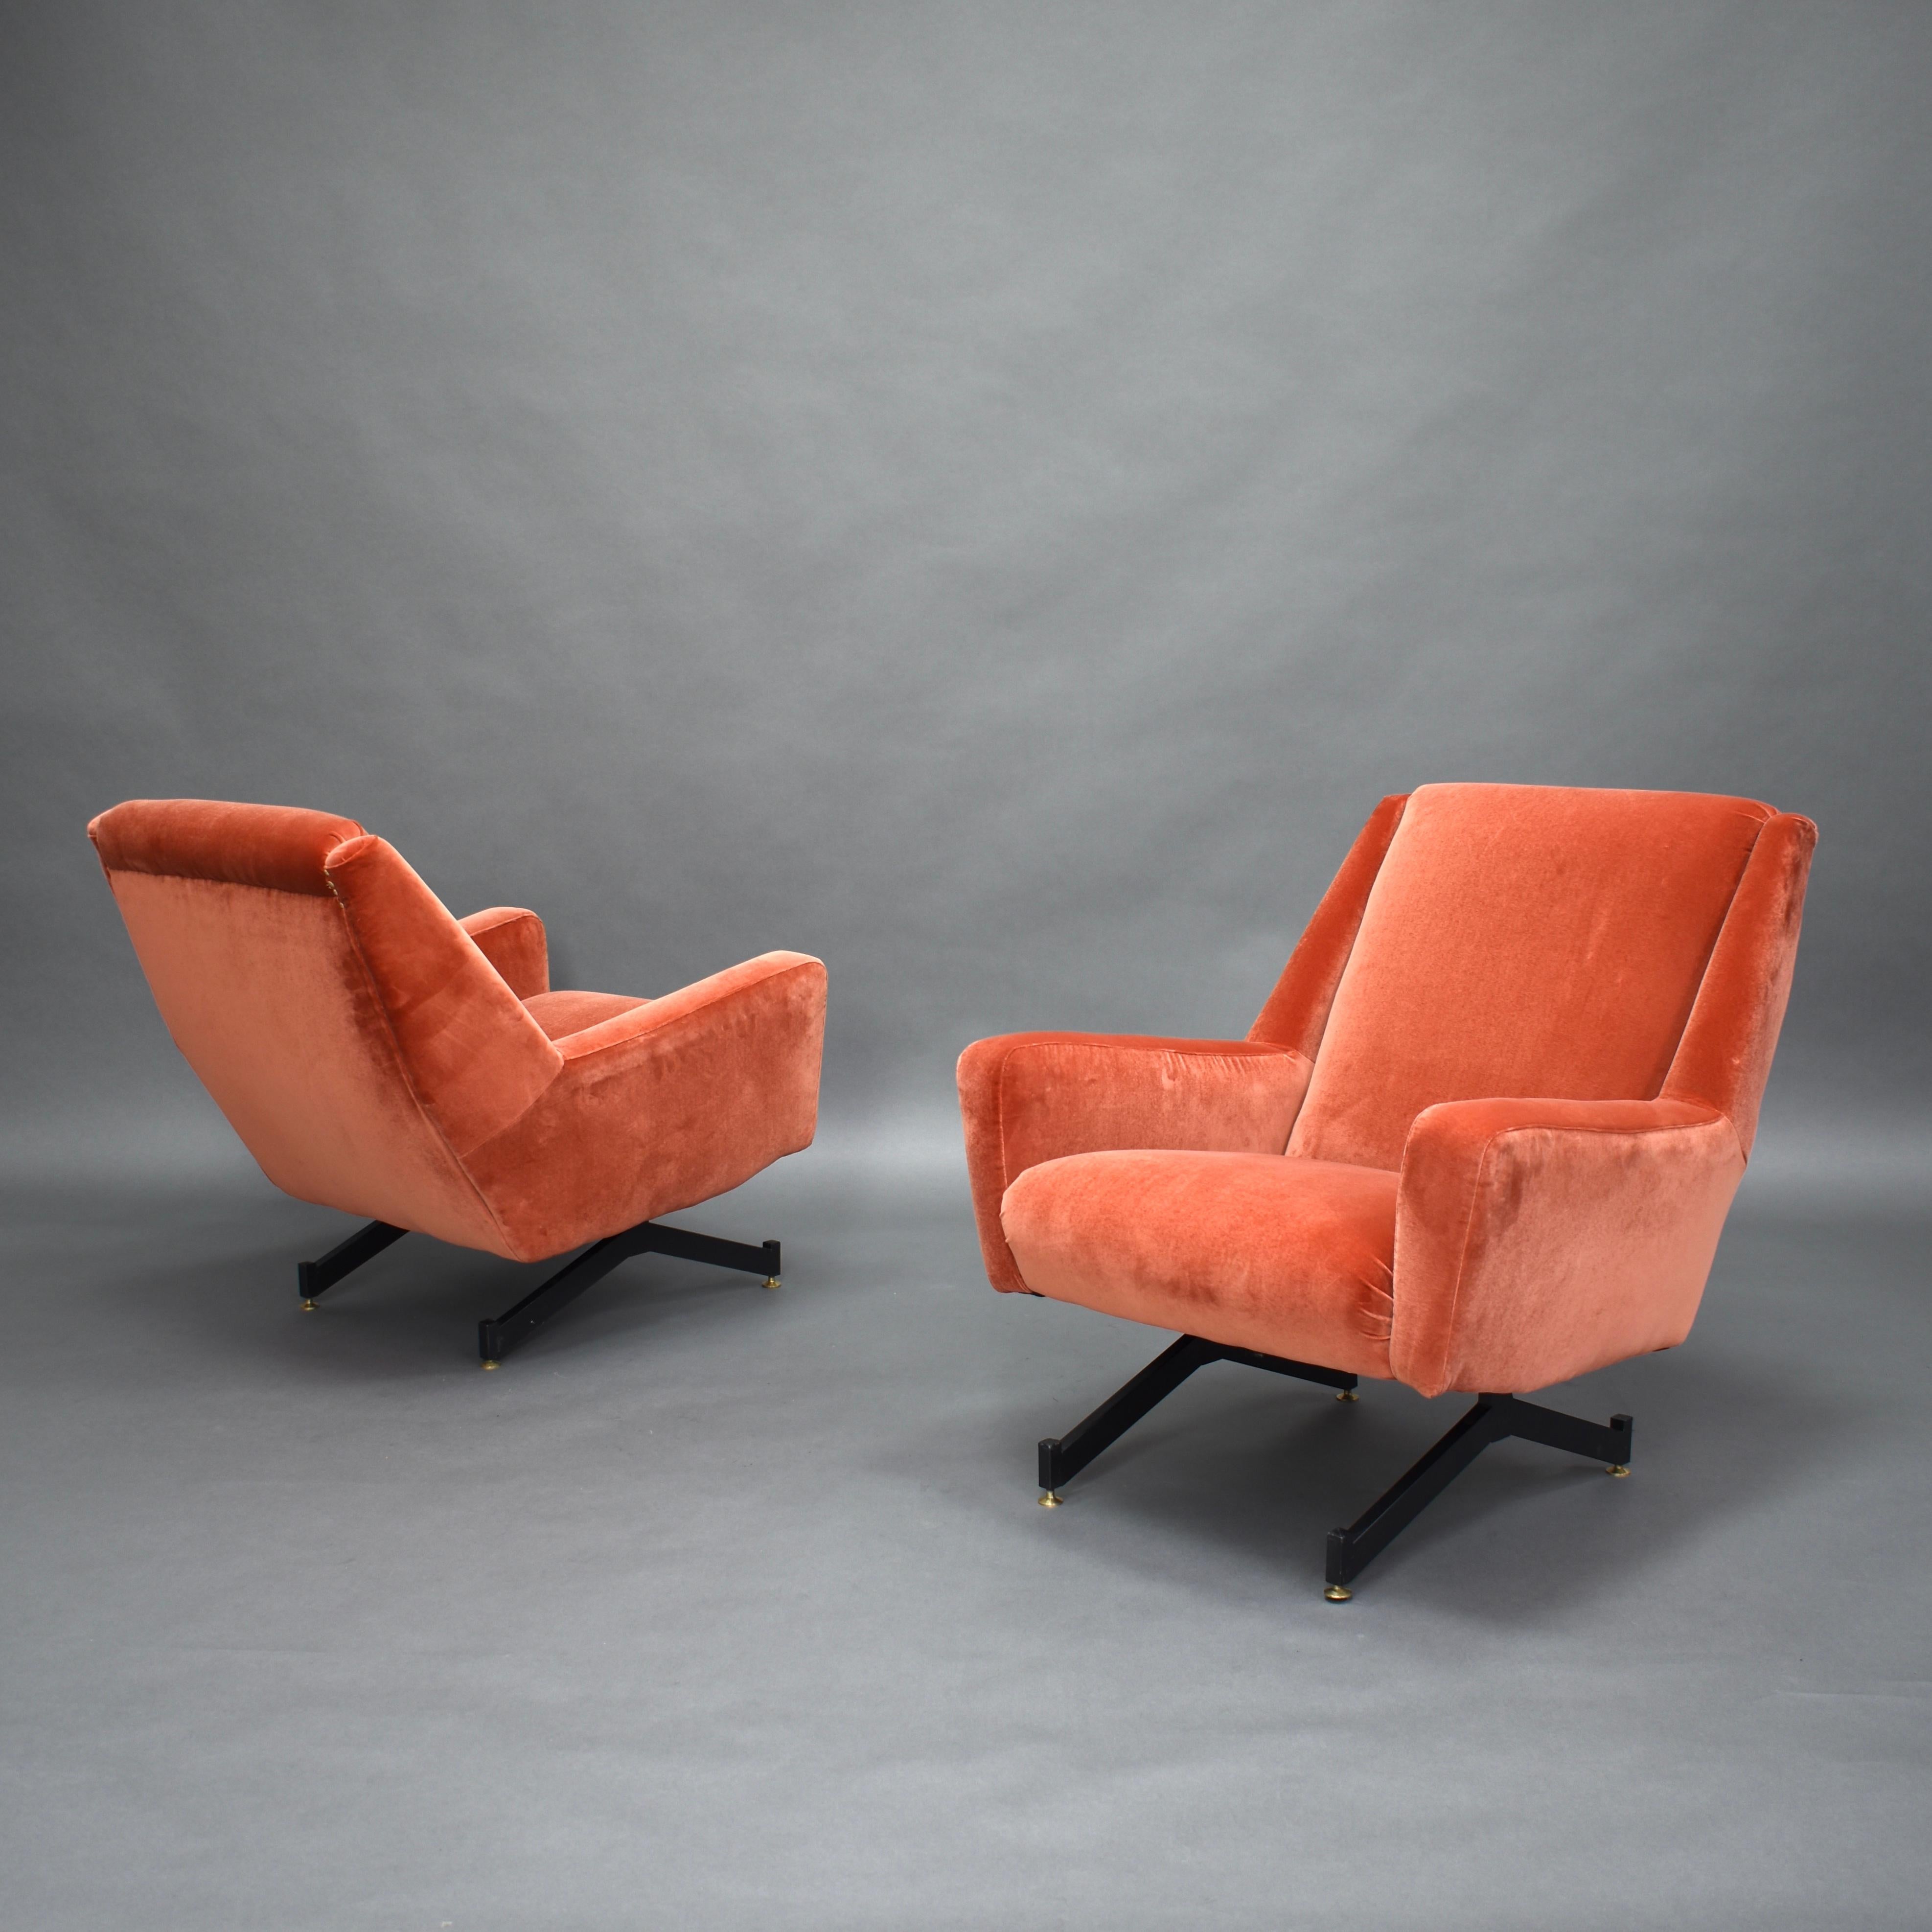 Mid-Century Modern Pair of Italian Midcentury Lounge Chairs in New Copper Pink Velvet, 1950s